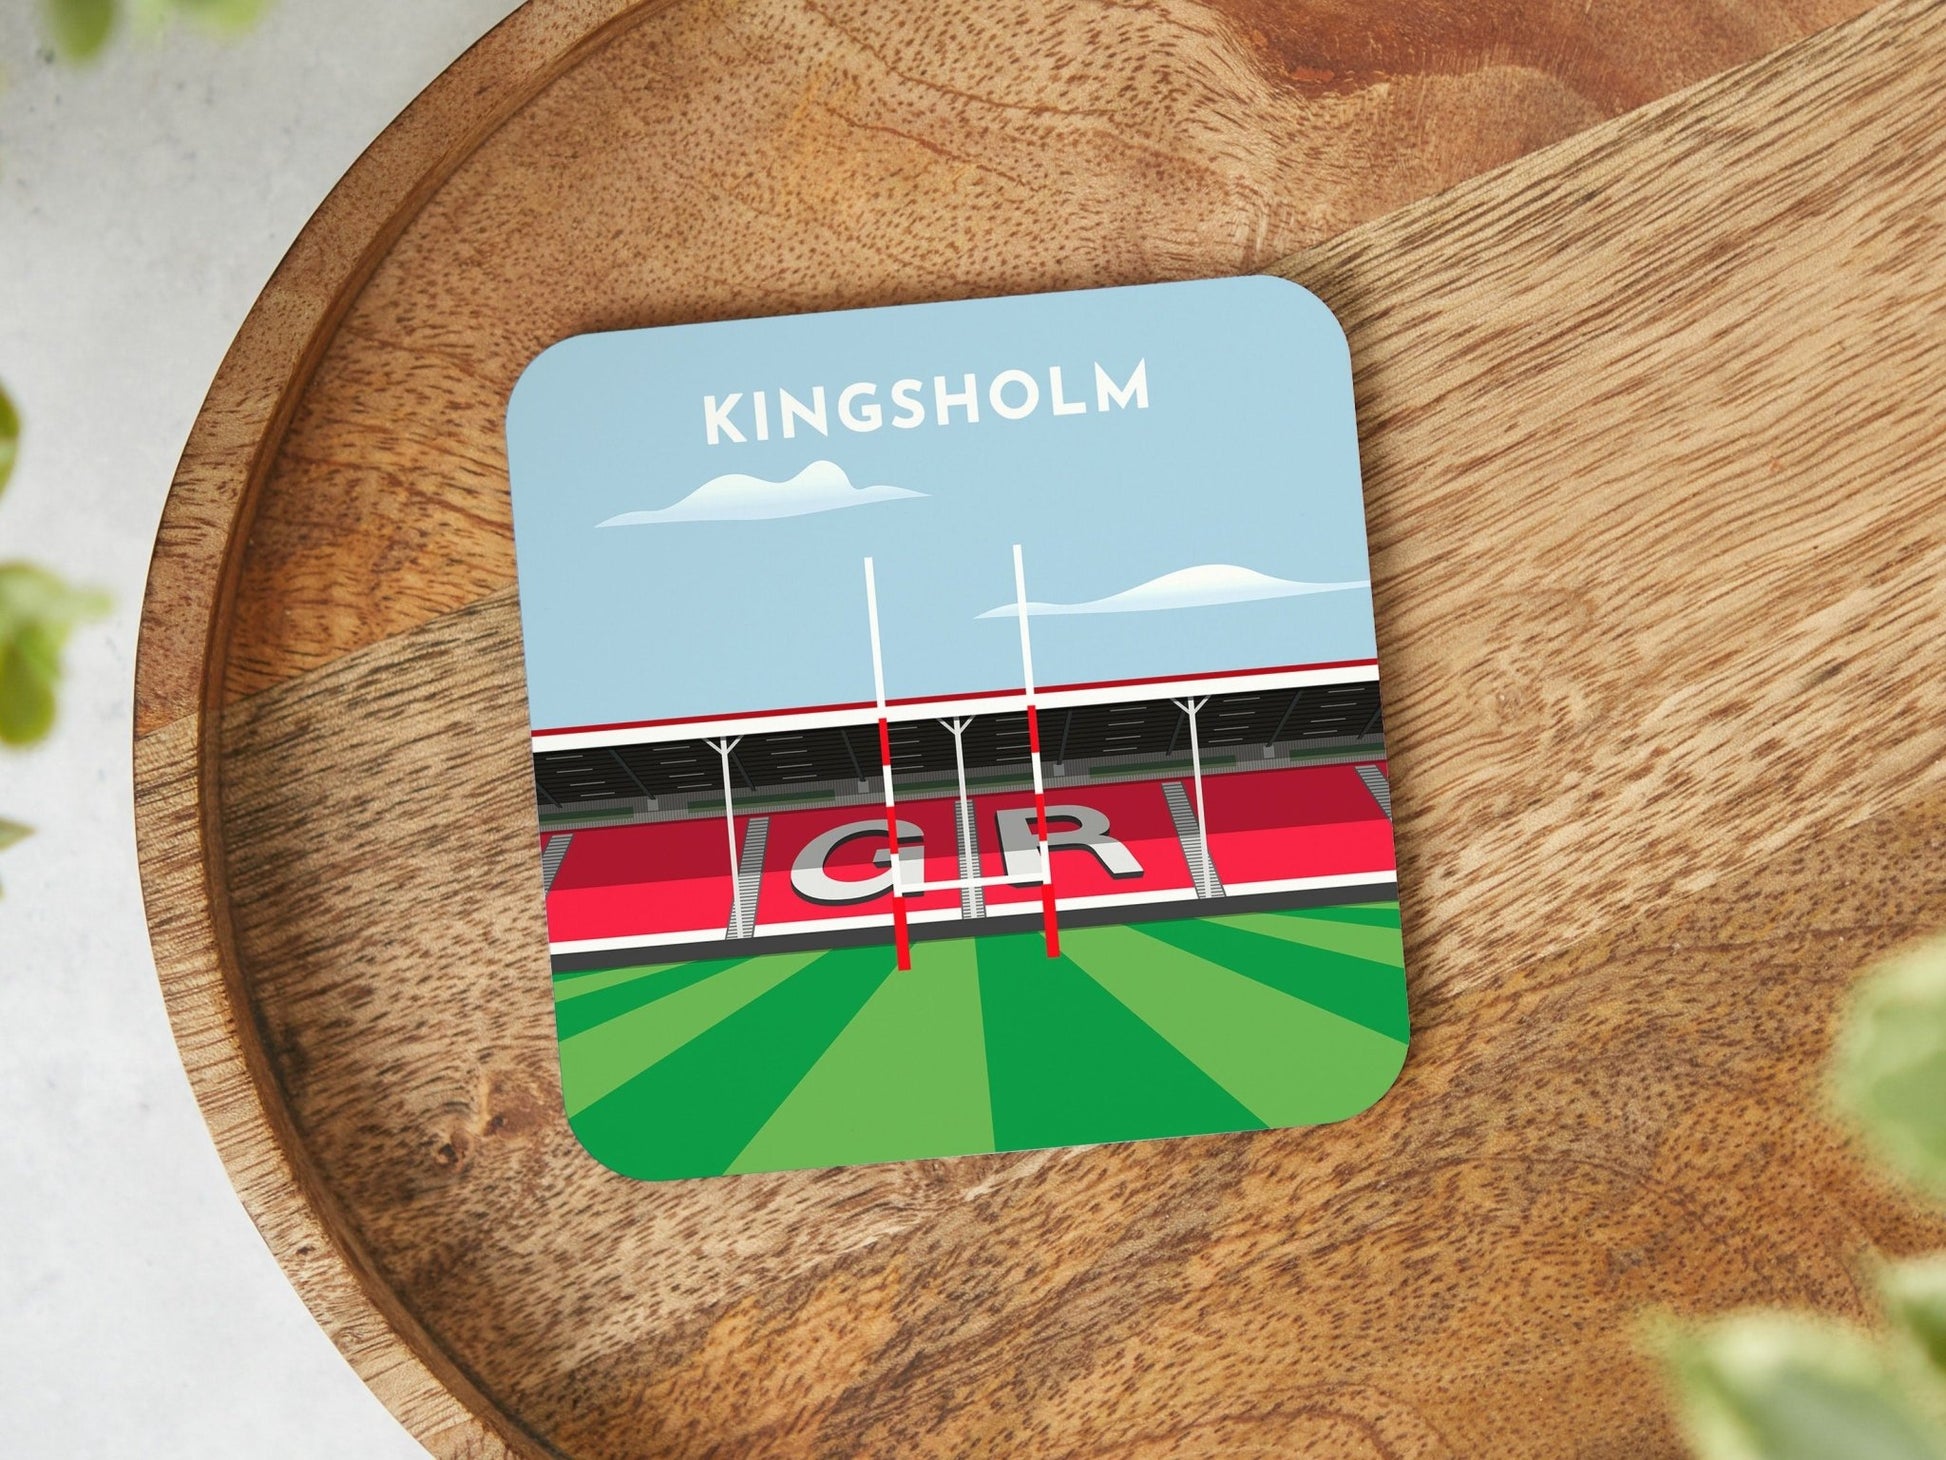 Gloucester Rugby Stadium Coaster - Kingsholm Ground Colourful Beer Mat - Rugger Fan Retro Drinksware - Unique Trendy Sports Pub Decor - Turf Football Art